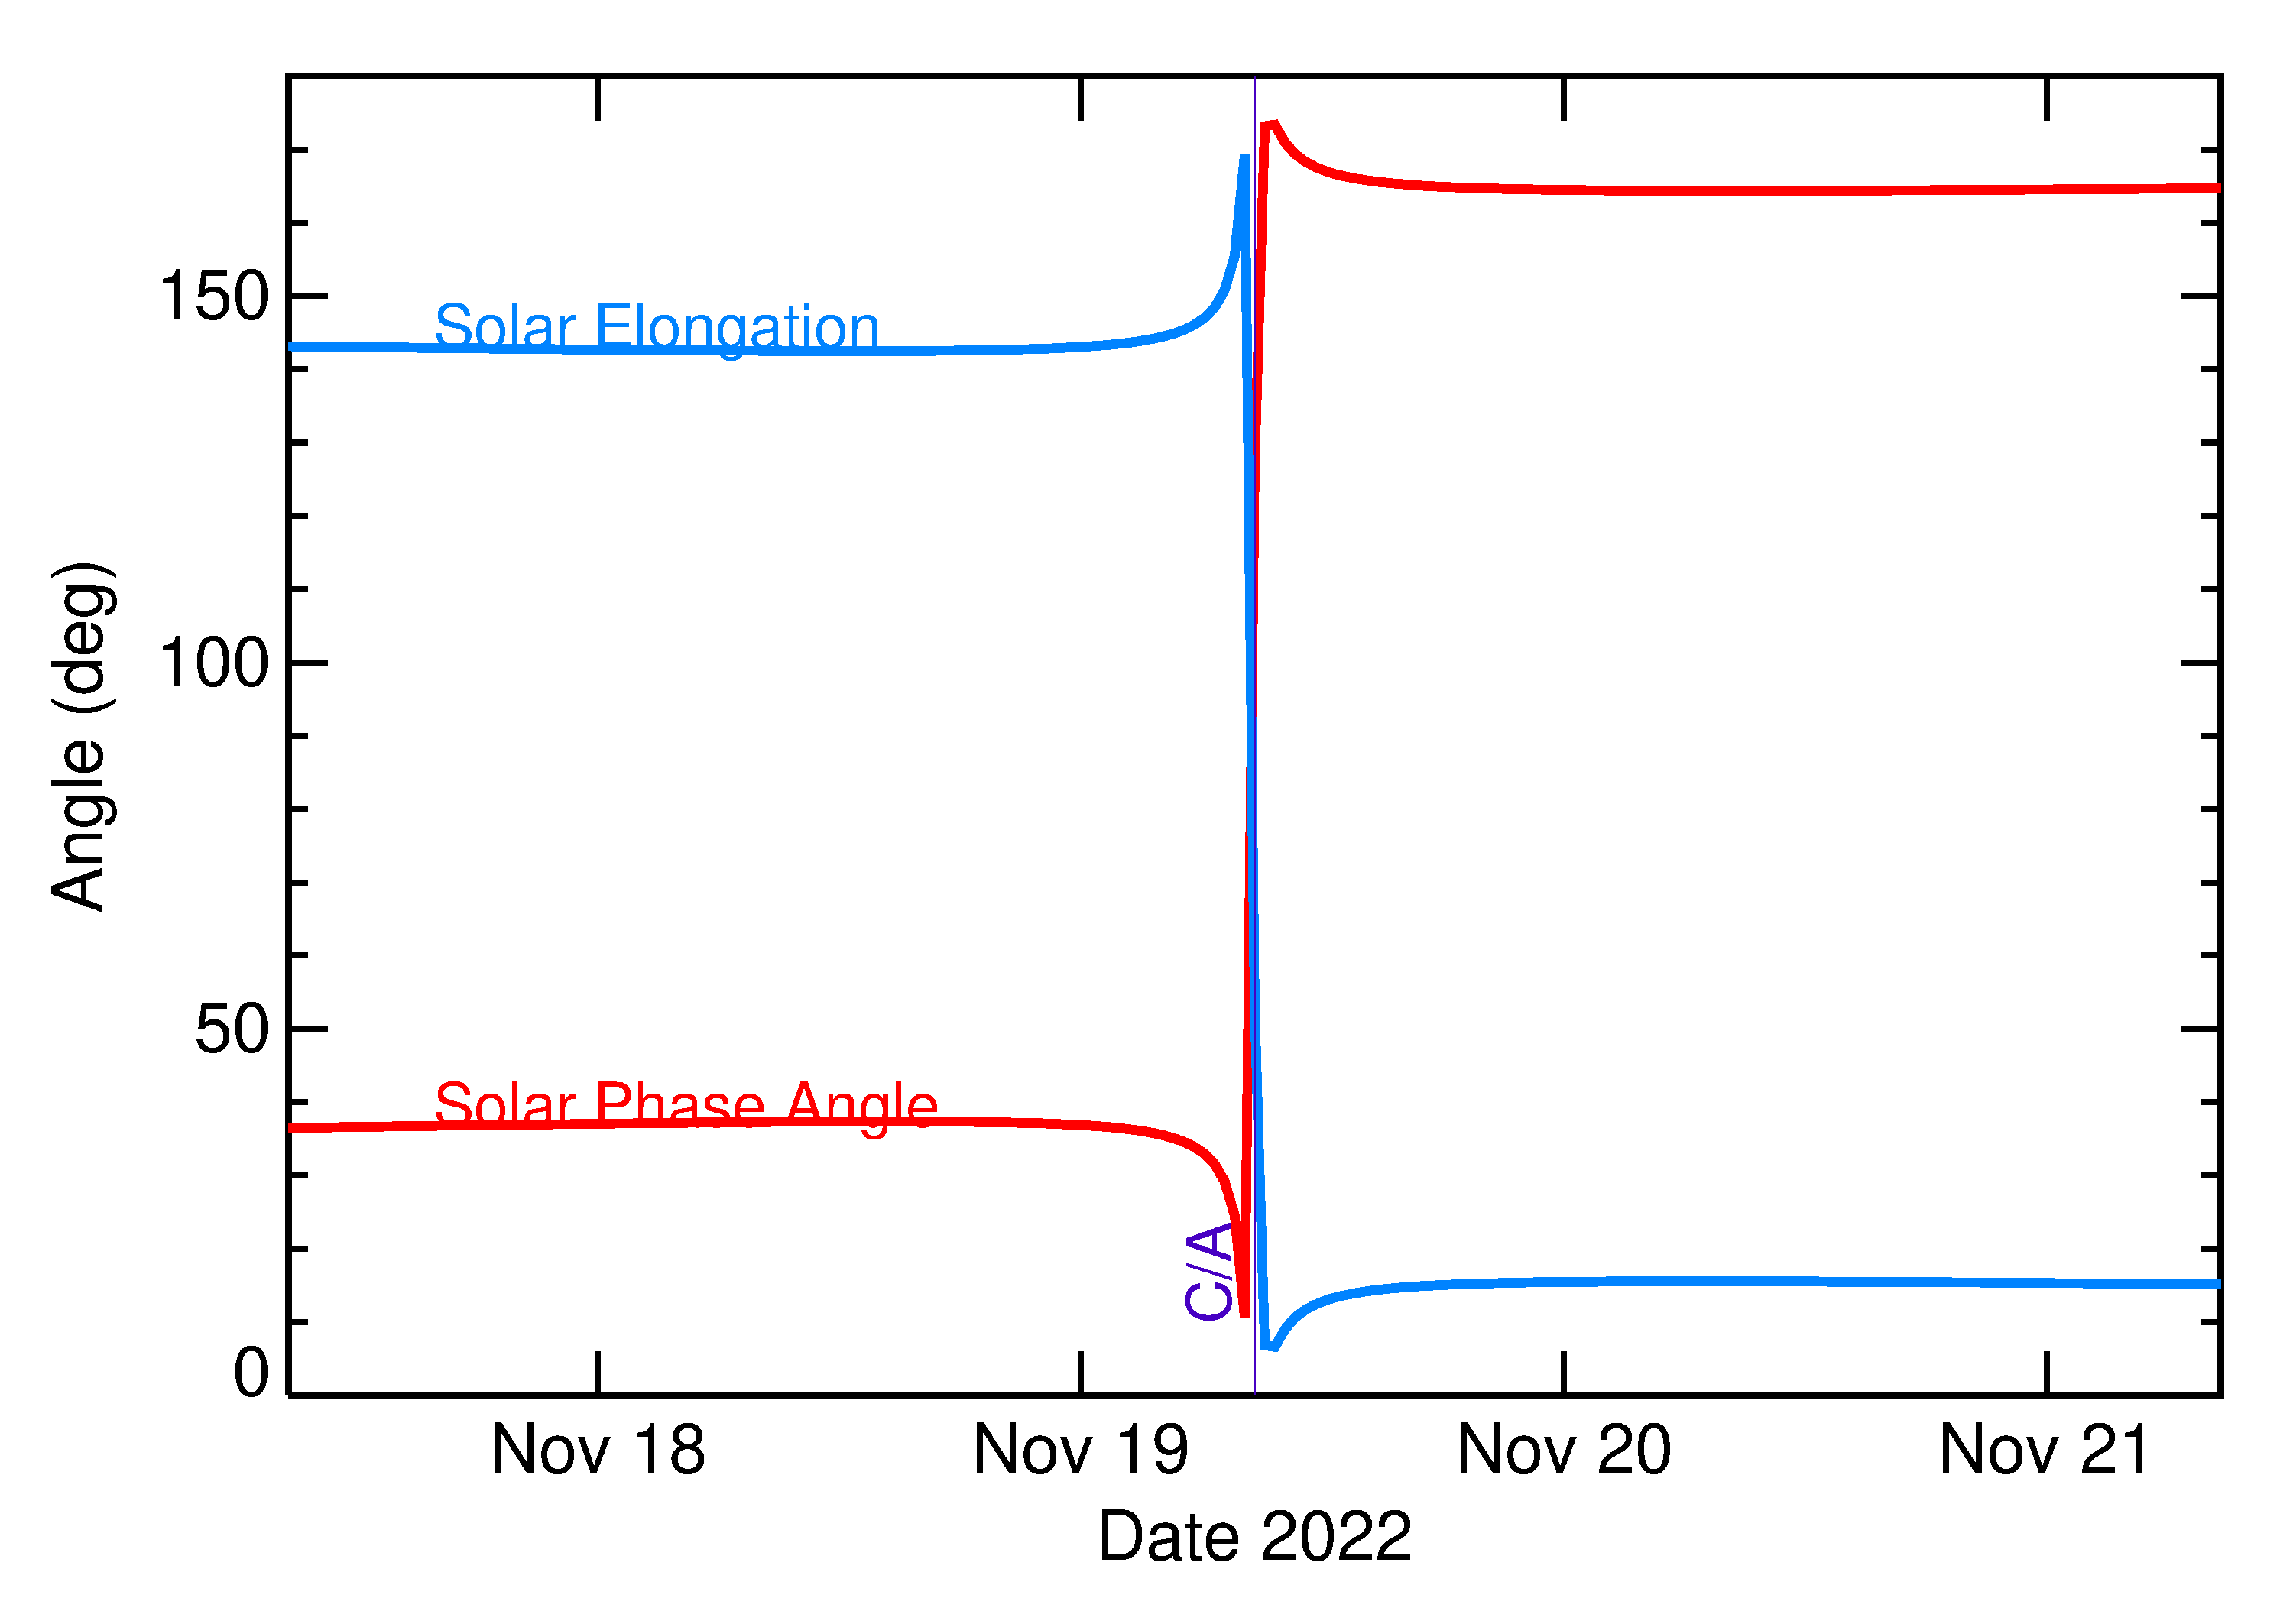 Solar Elongation and Solar Phase Angle of 2022 WJ1 in the days around closest approach